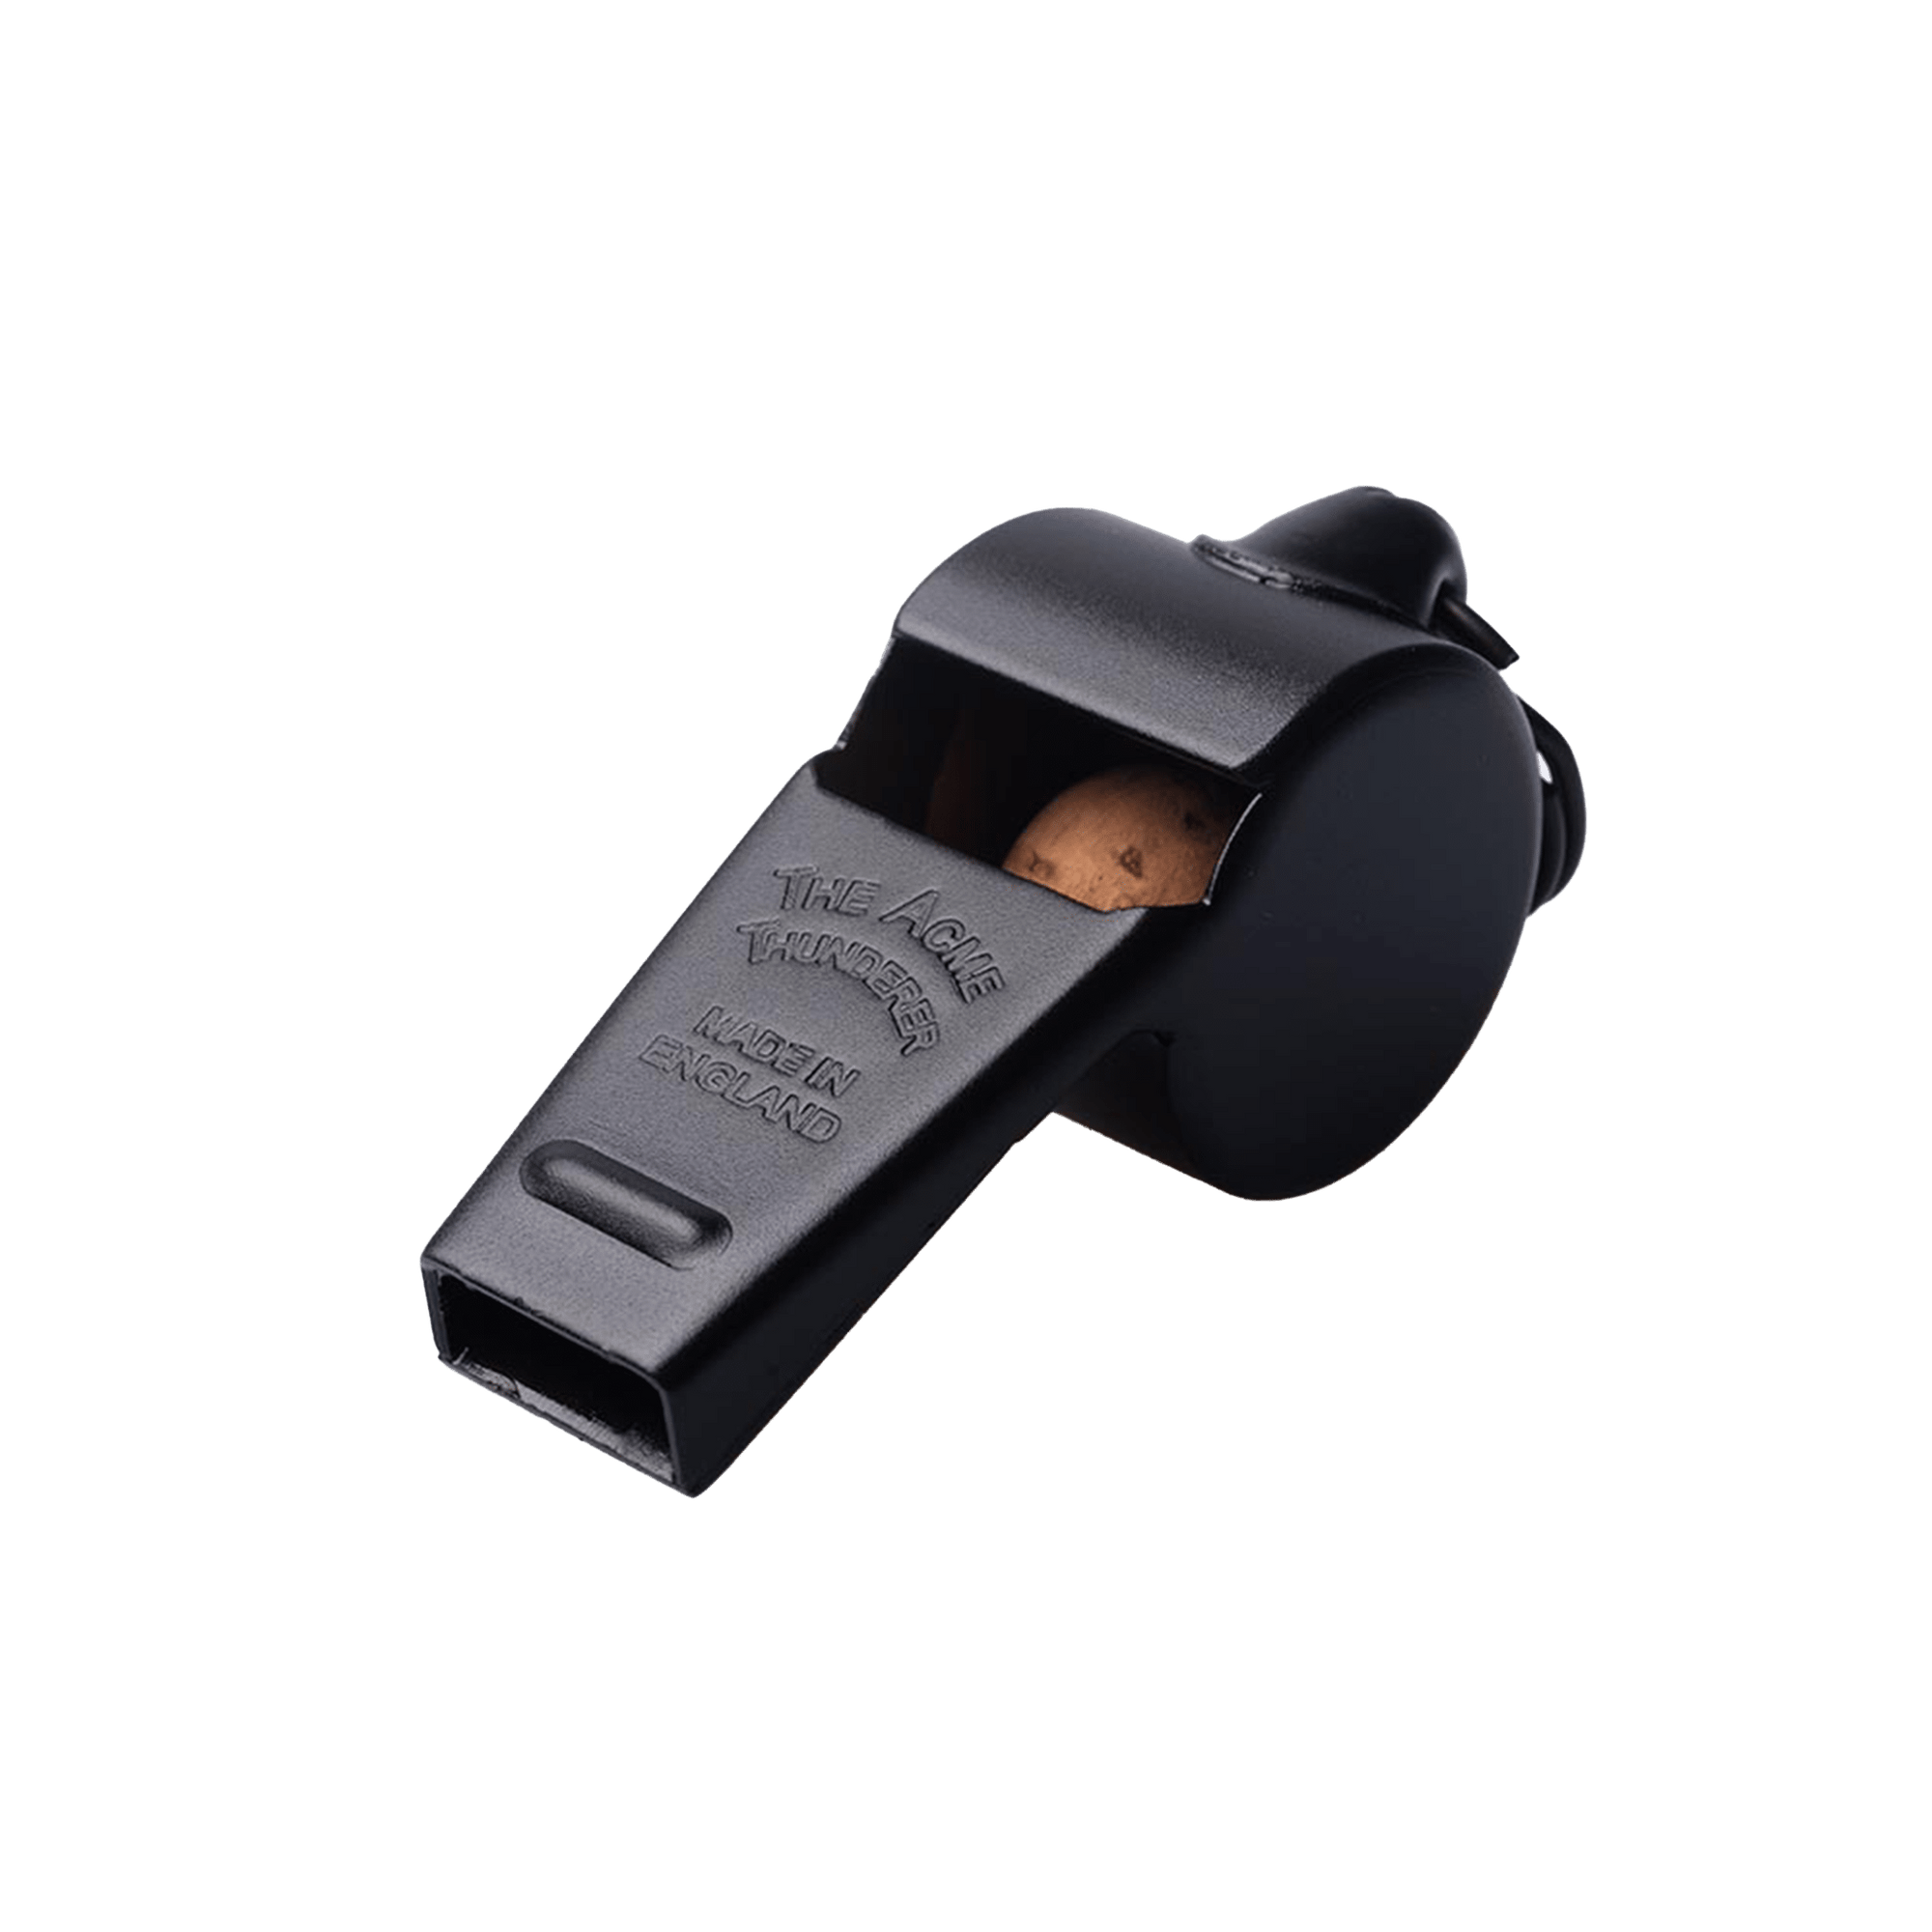 Command Authority with Acme Thunderer Symonite Whistle - 58.5 Matt Black - Essential Rugby Referee Equipment